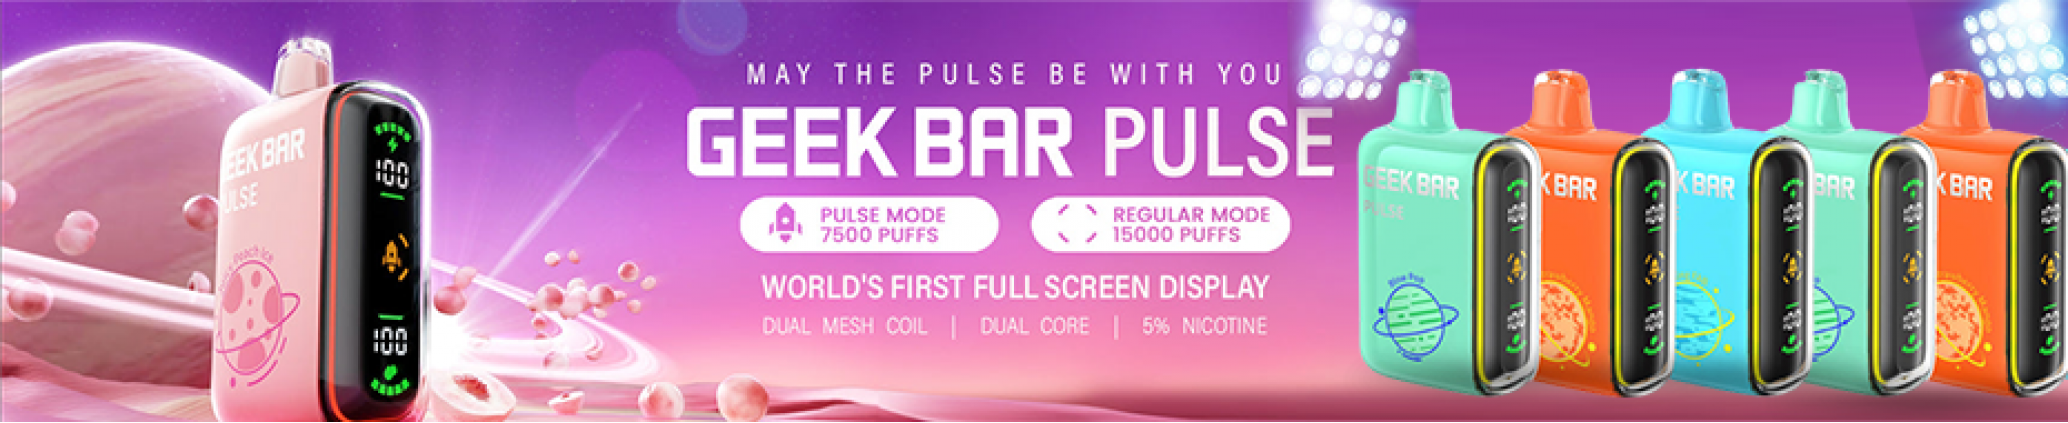 A 15000 puff count means the Geek Bar Pulse vape is long-lasting, eliminating the need to replace it frequently. Additionally, it is affordable at $14.99, so you can buy it online.